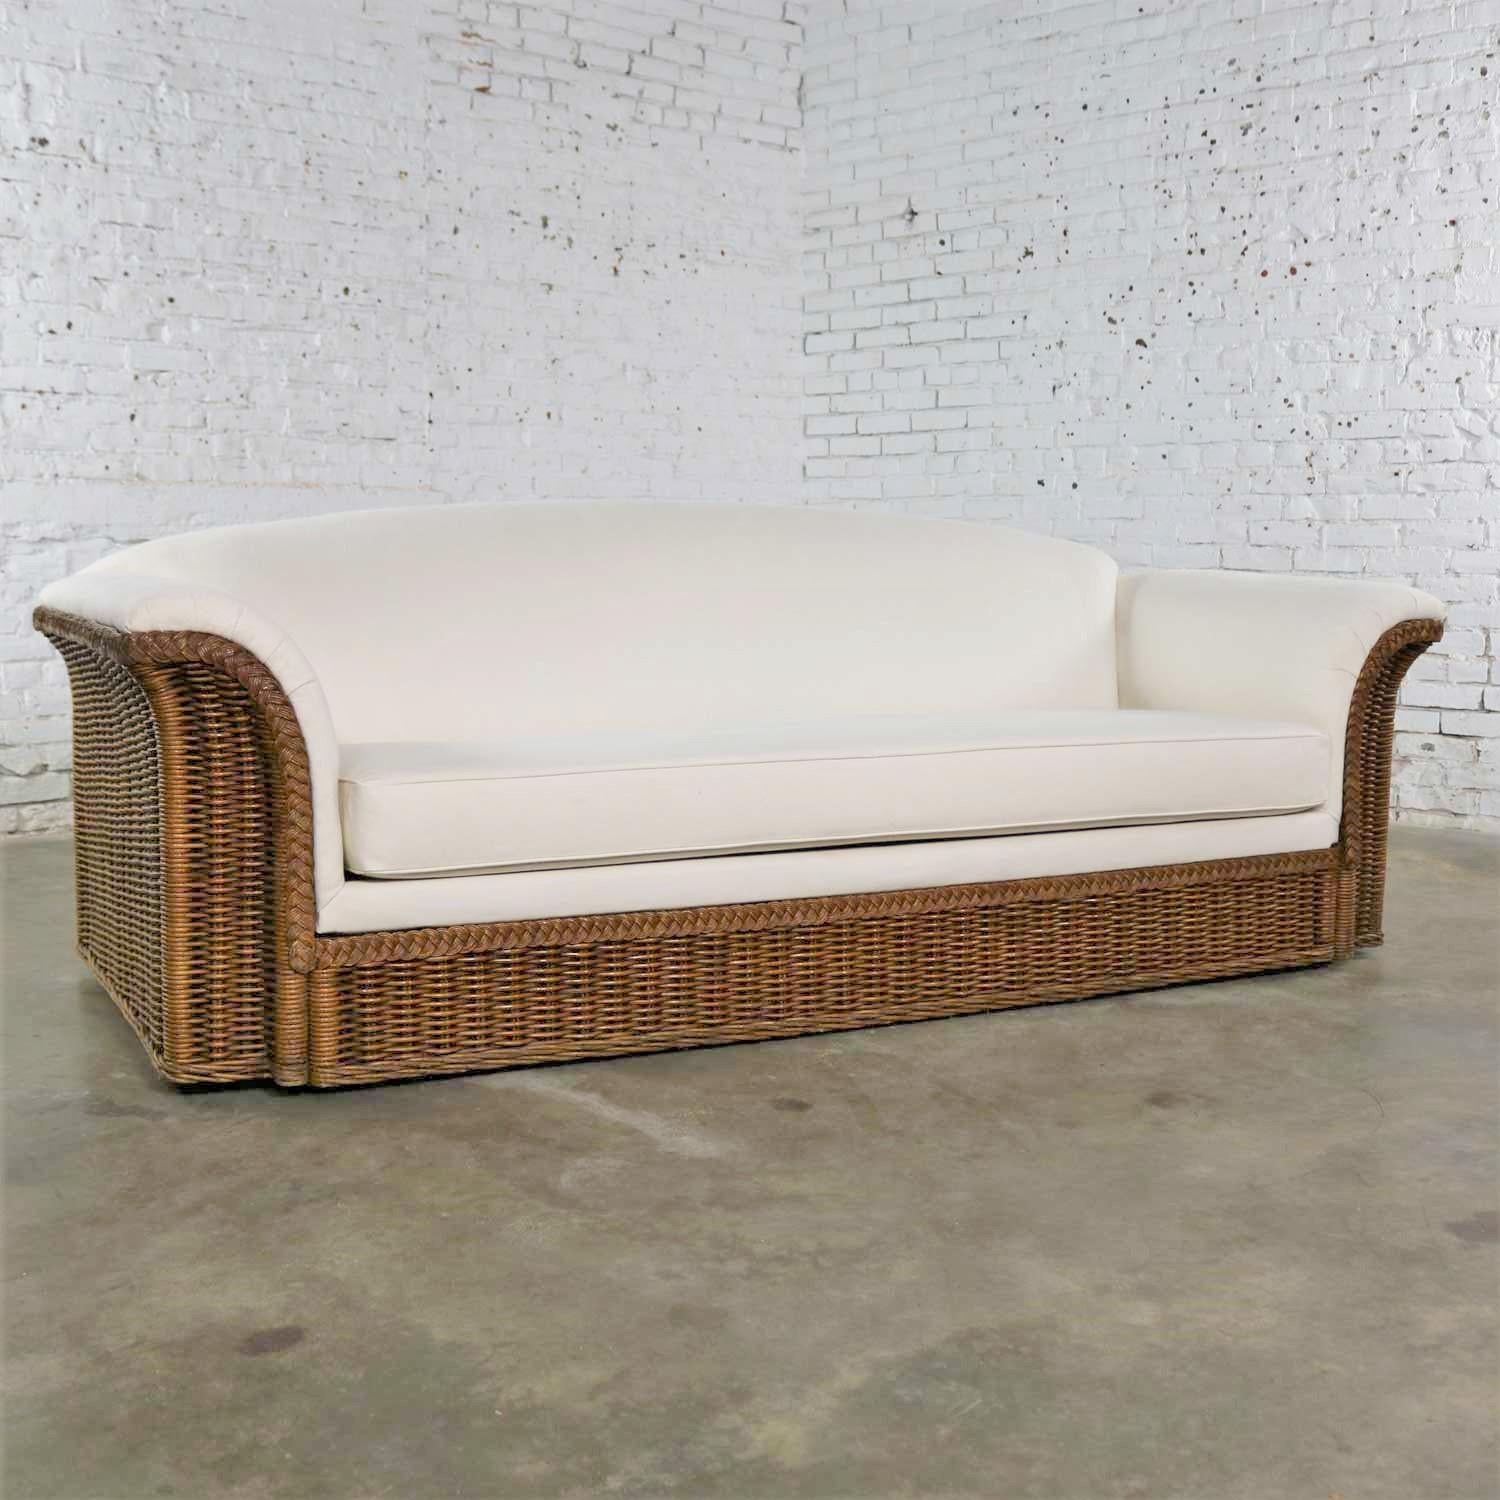 Extraordinary wicker sofa vintage in the manner of Michael Taylor. It has been newly recovered in creamy white cotton canvas. It is in fabulous condition and ready to use. Please see photos, circa mid-late 20th century.

Ok. We are in love with